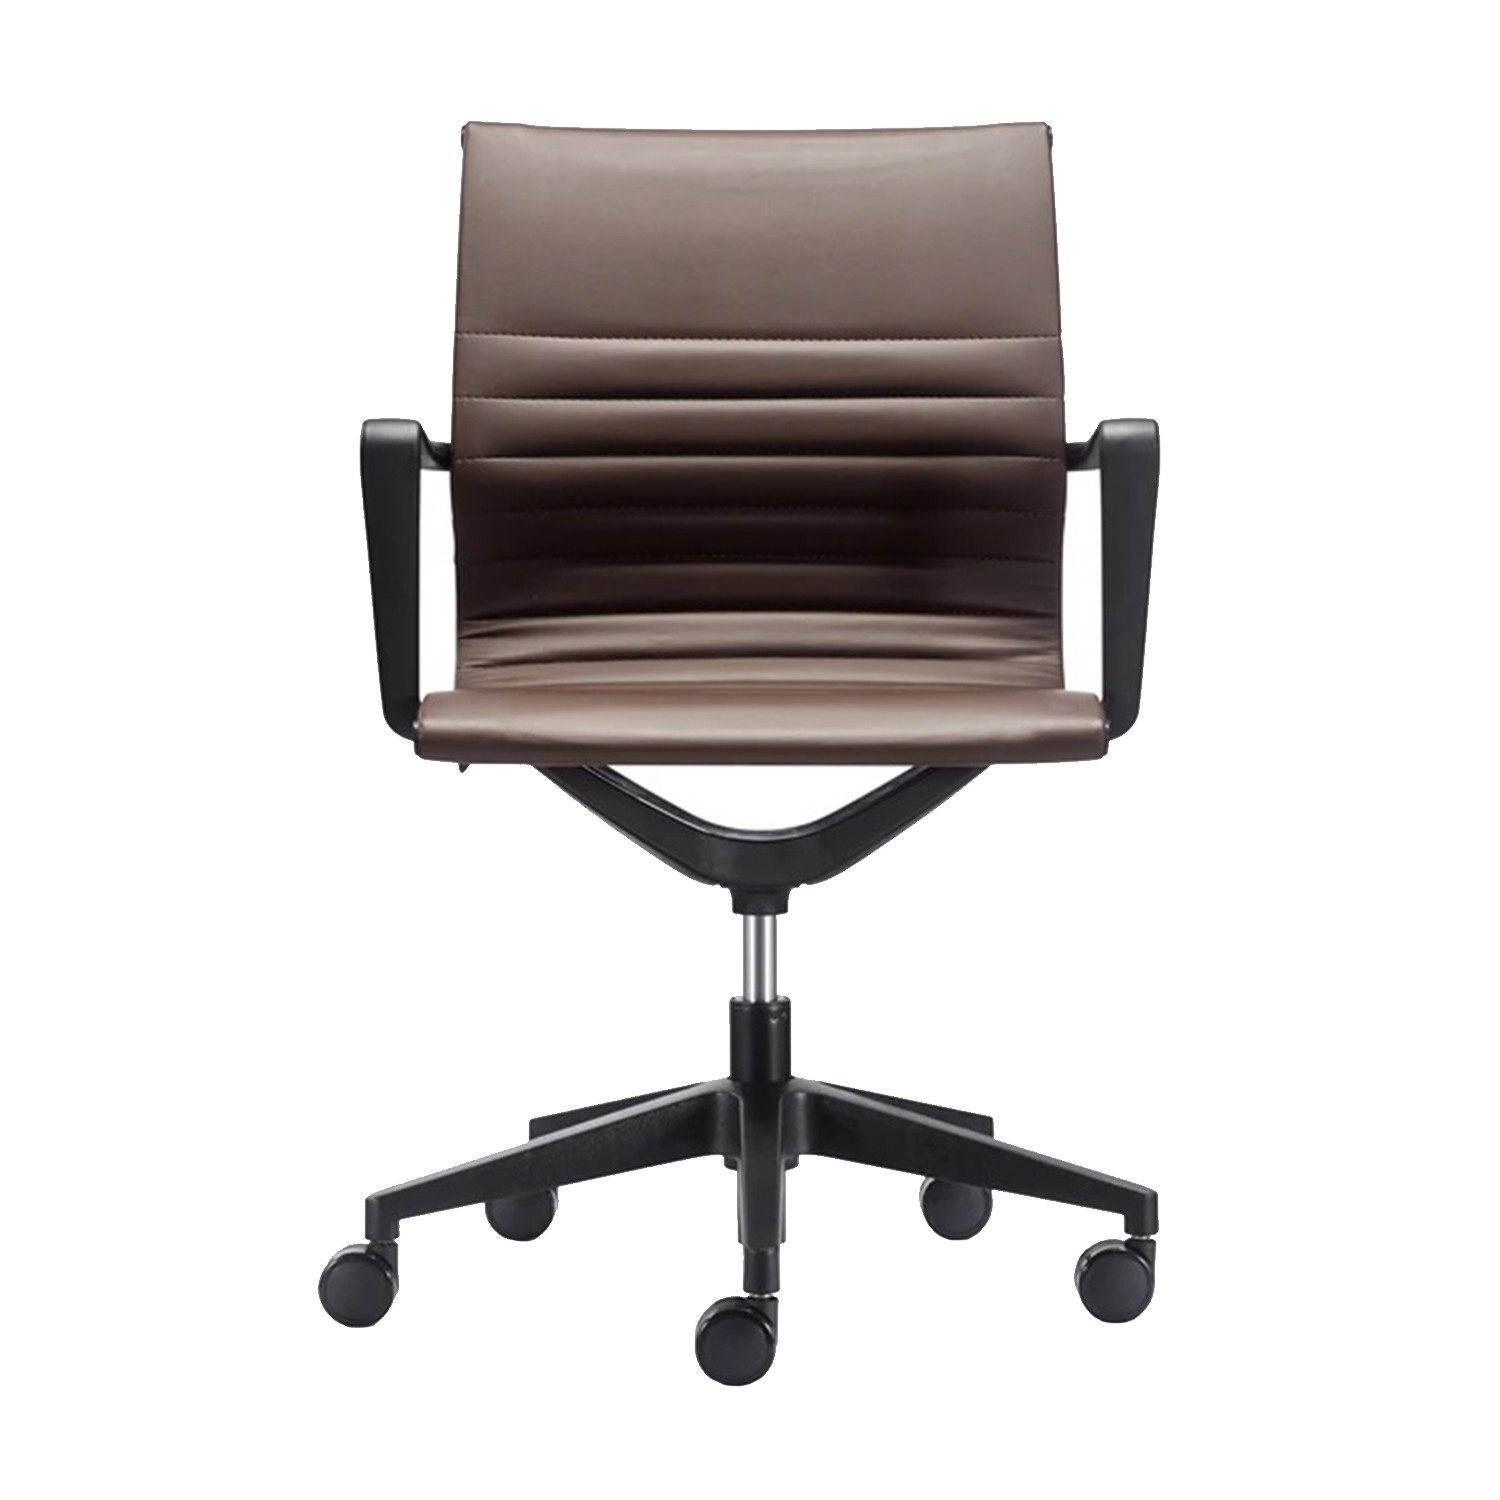 Brown and Black Adjustable Swivel Faux Leather Rolling Office Chair-372466-1